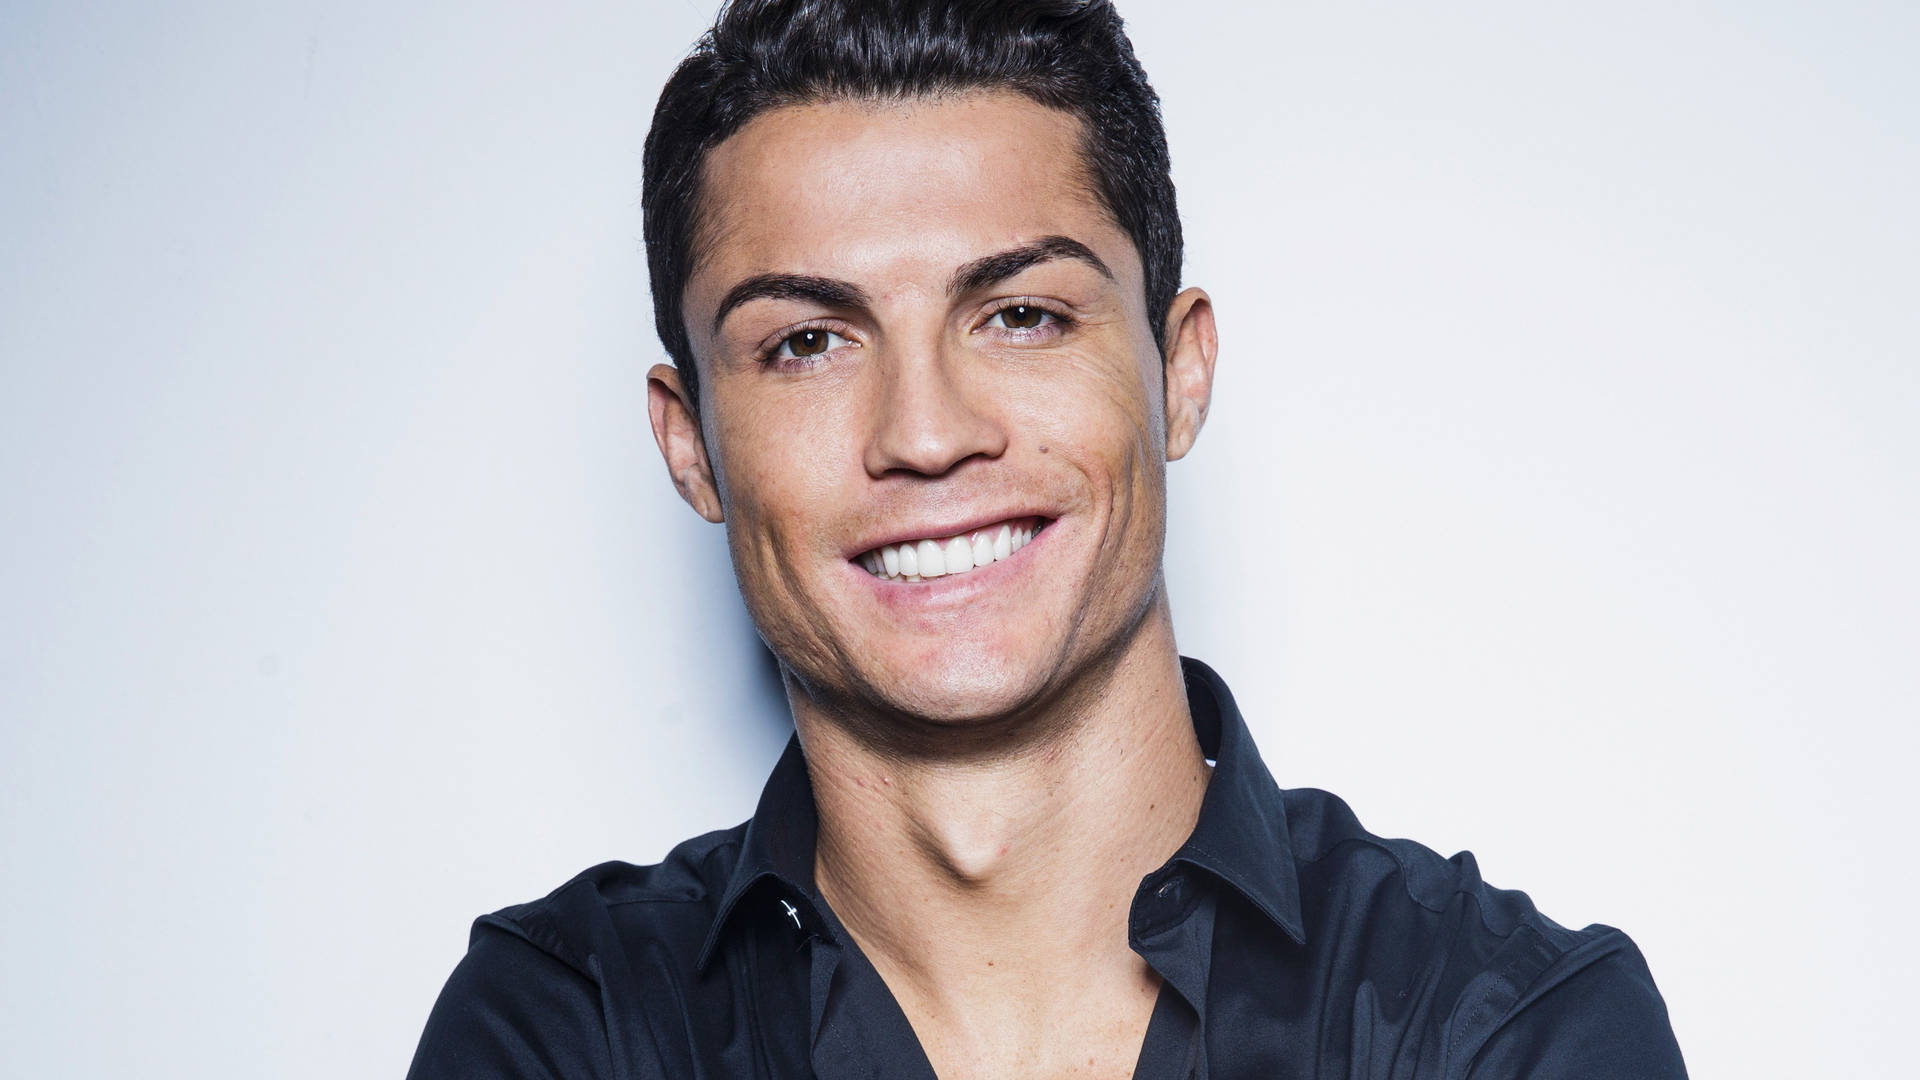 Cr7 Hd Broad Smile Background